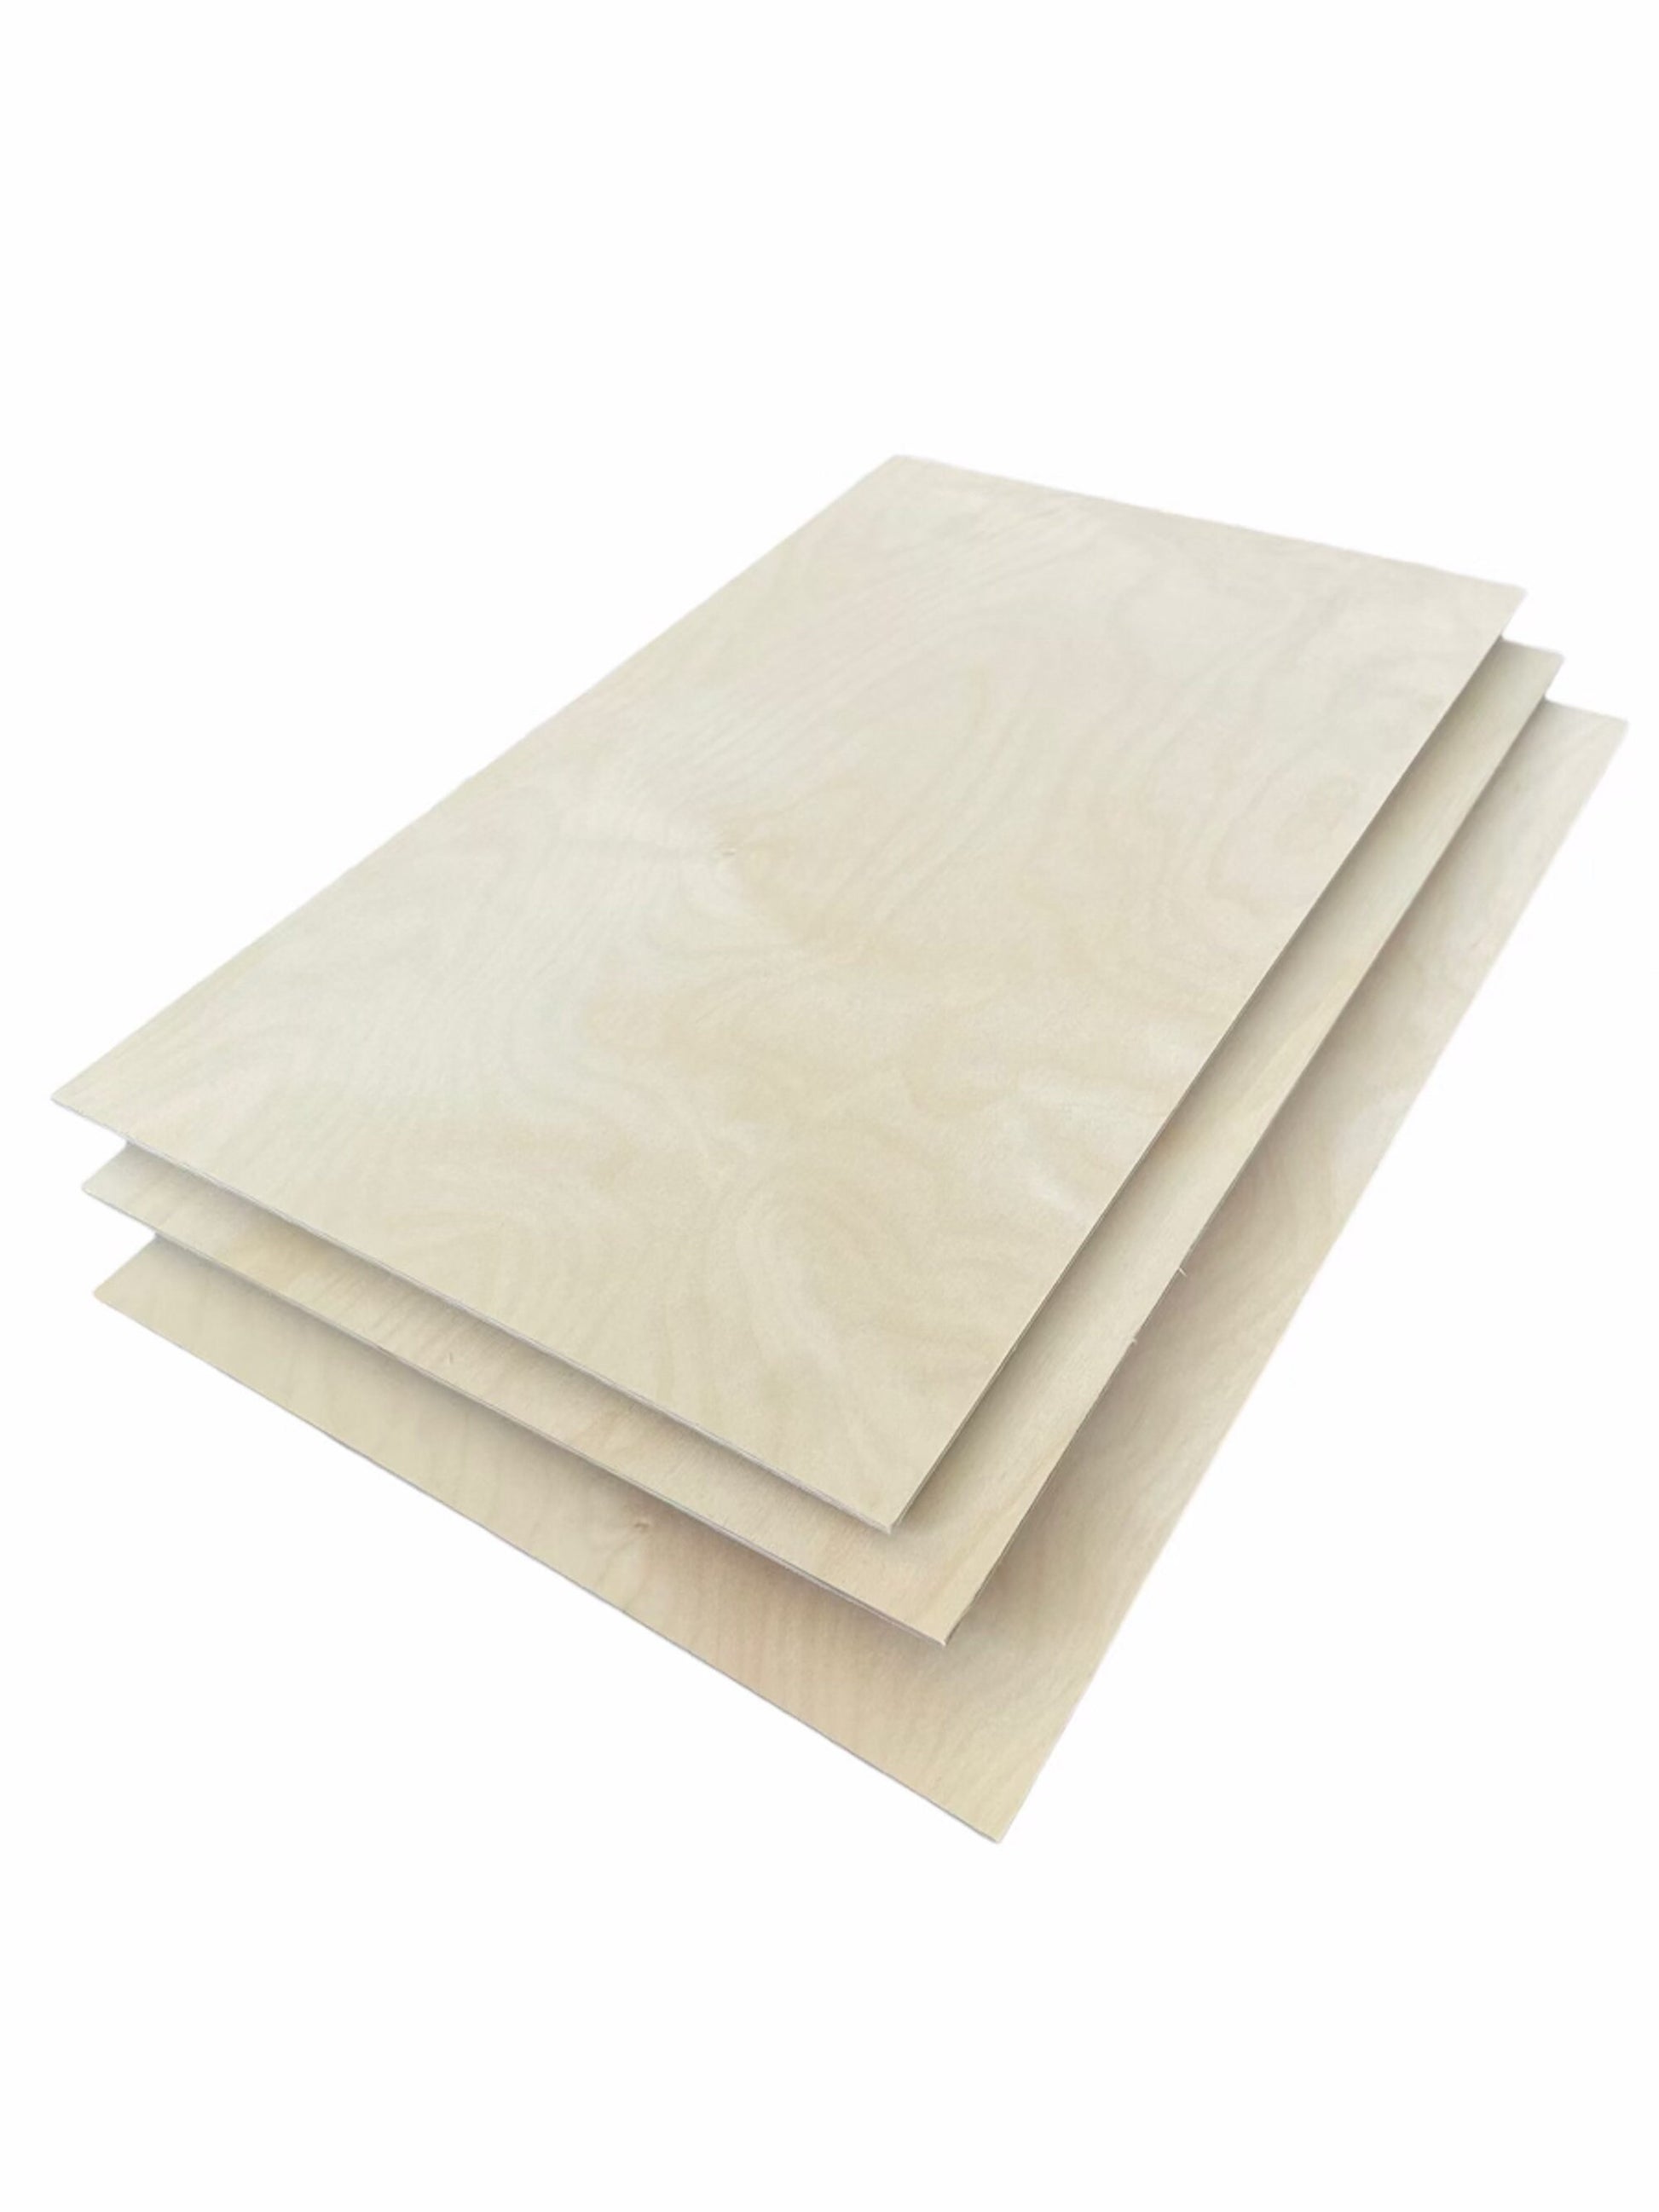 3mm (1/8) Premium Baltic Birch Plywood Sheets Ideal for Crafts, Laser –  Iron Cove Customs